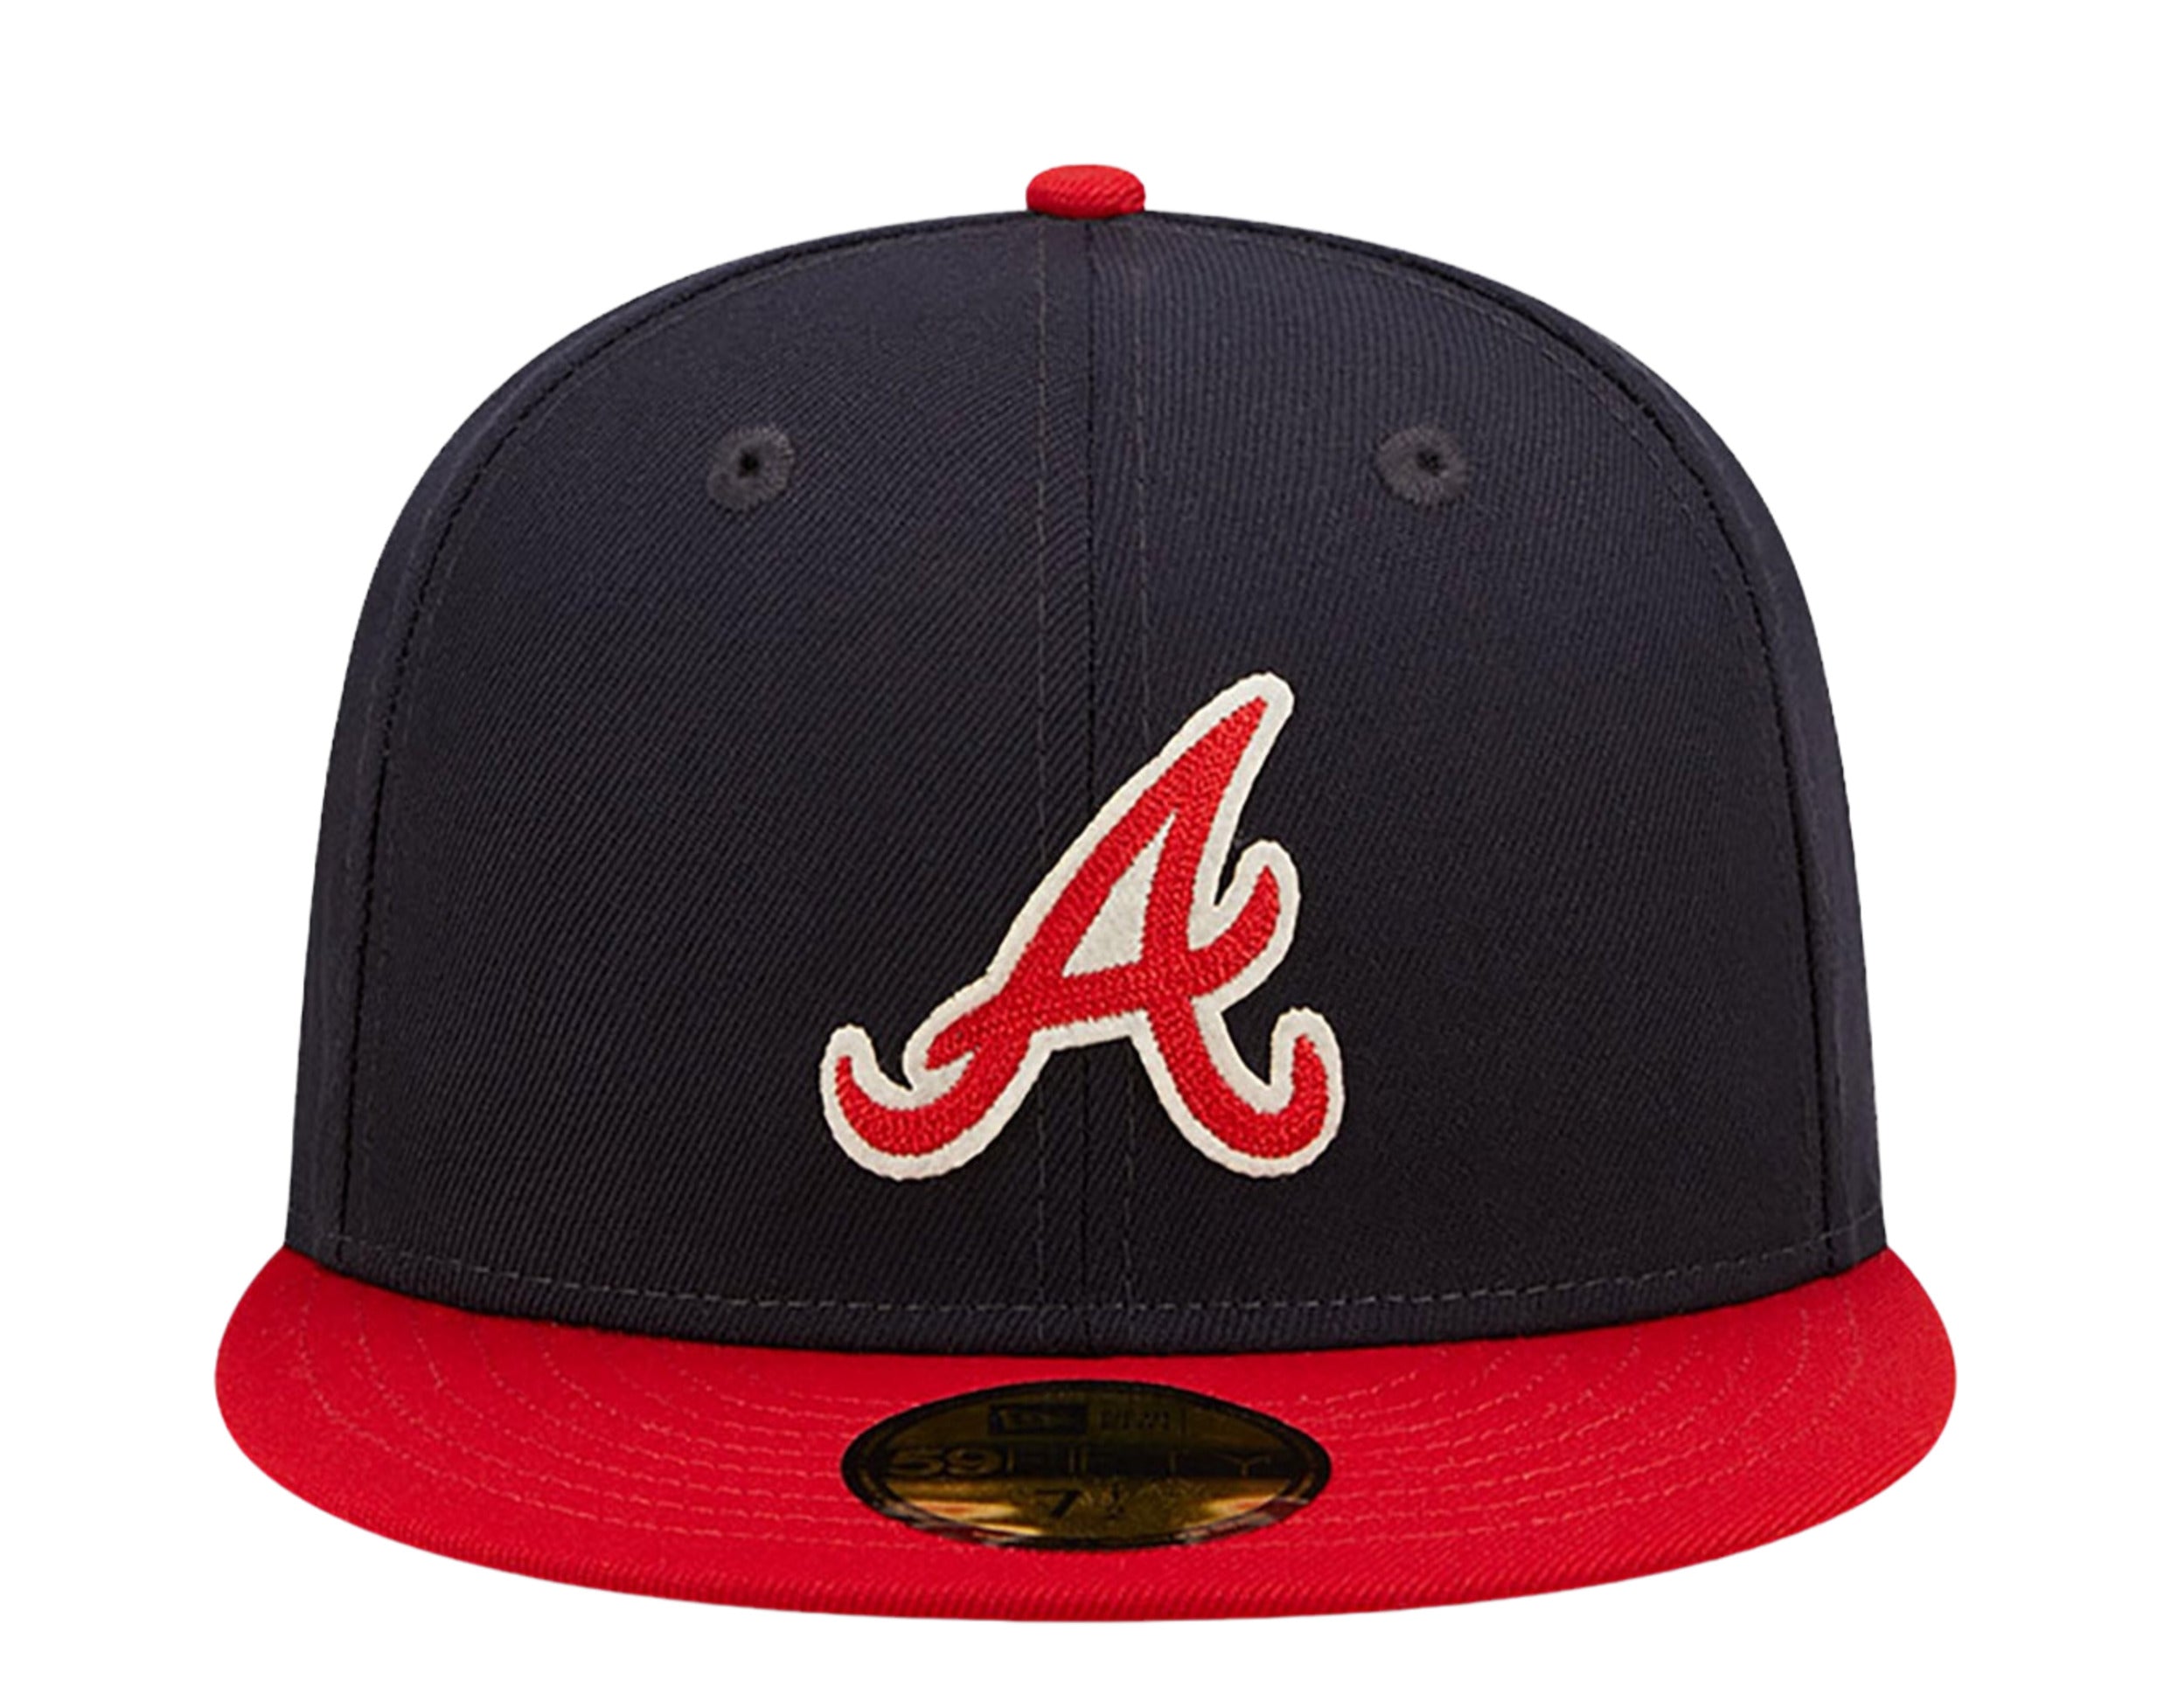 Shop New Era 59Fifty Atlanta Braves Letterman Fitted Hat 60296436